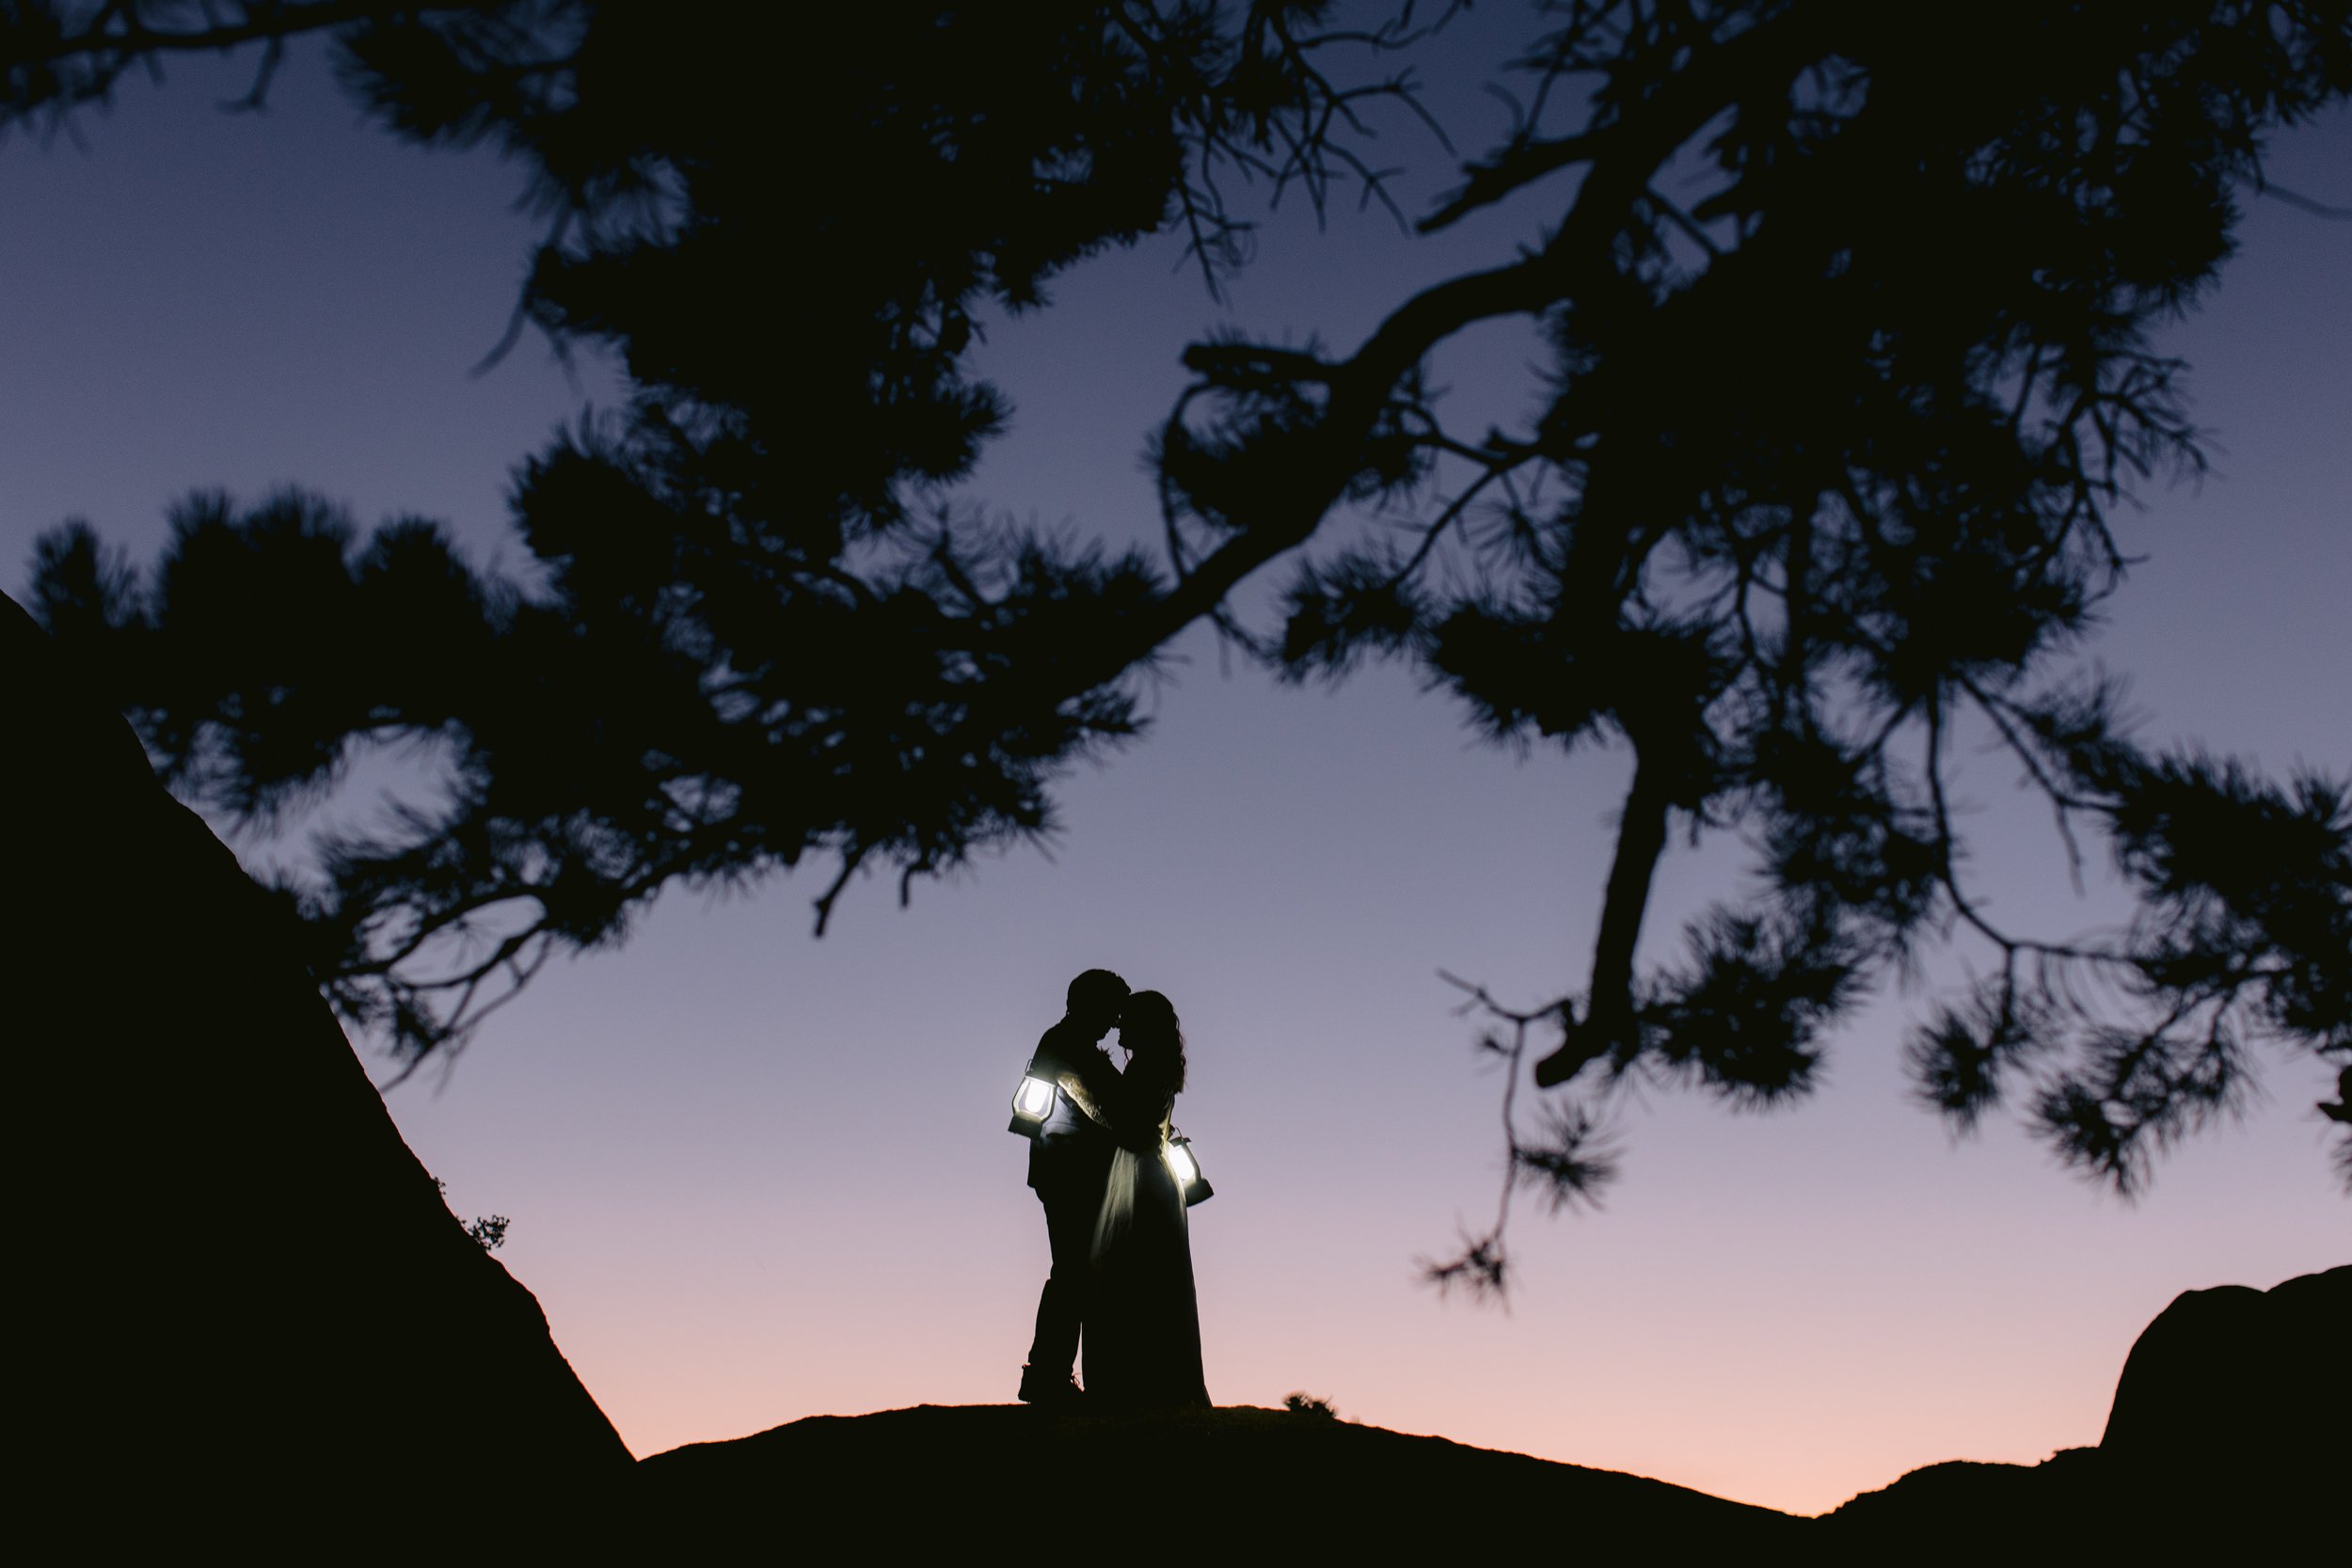 Silohuette of Couple embracing on rocks in desert - image by GunnShot Photography